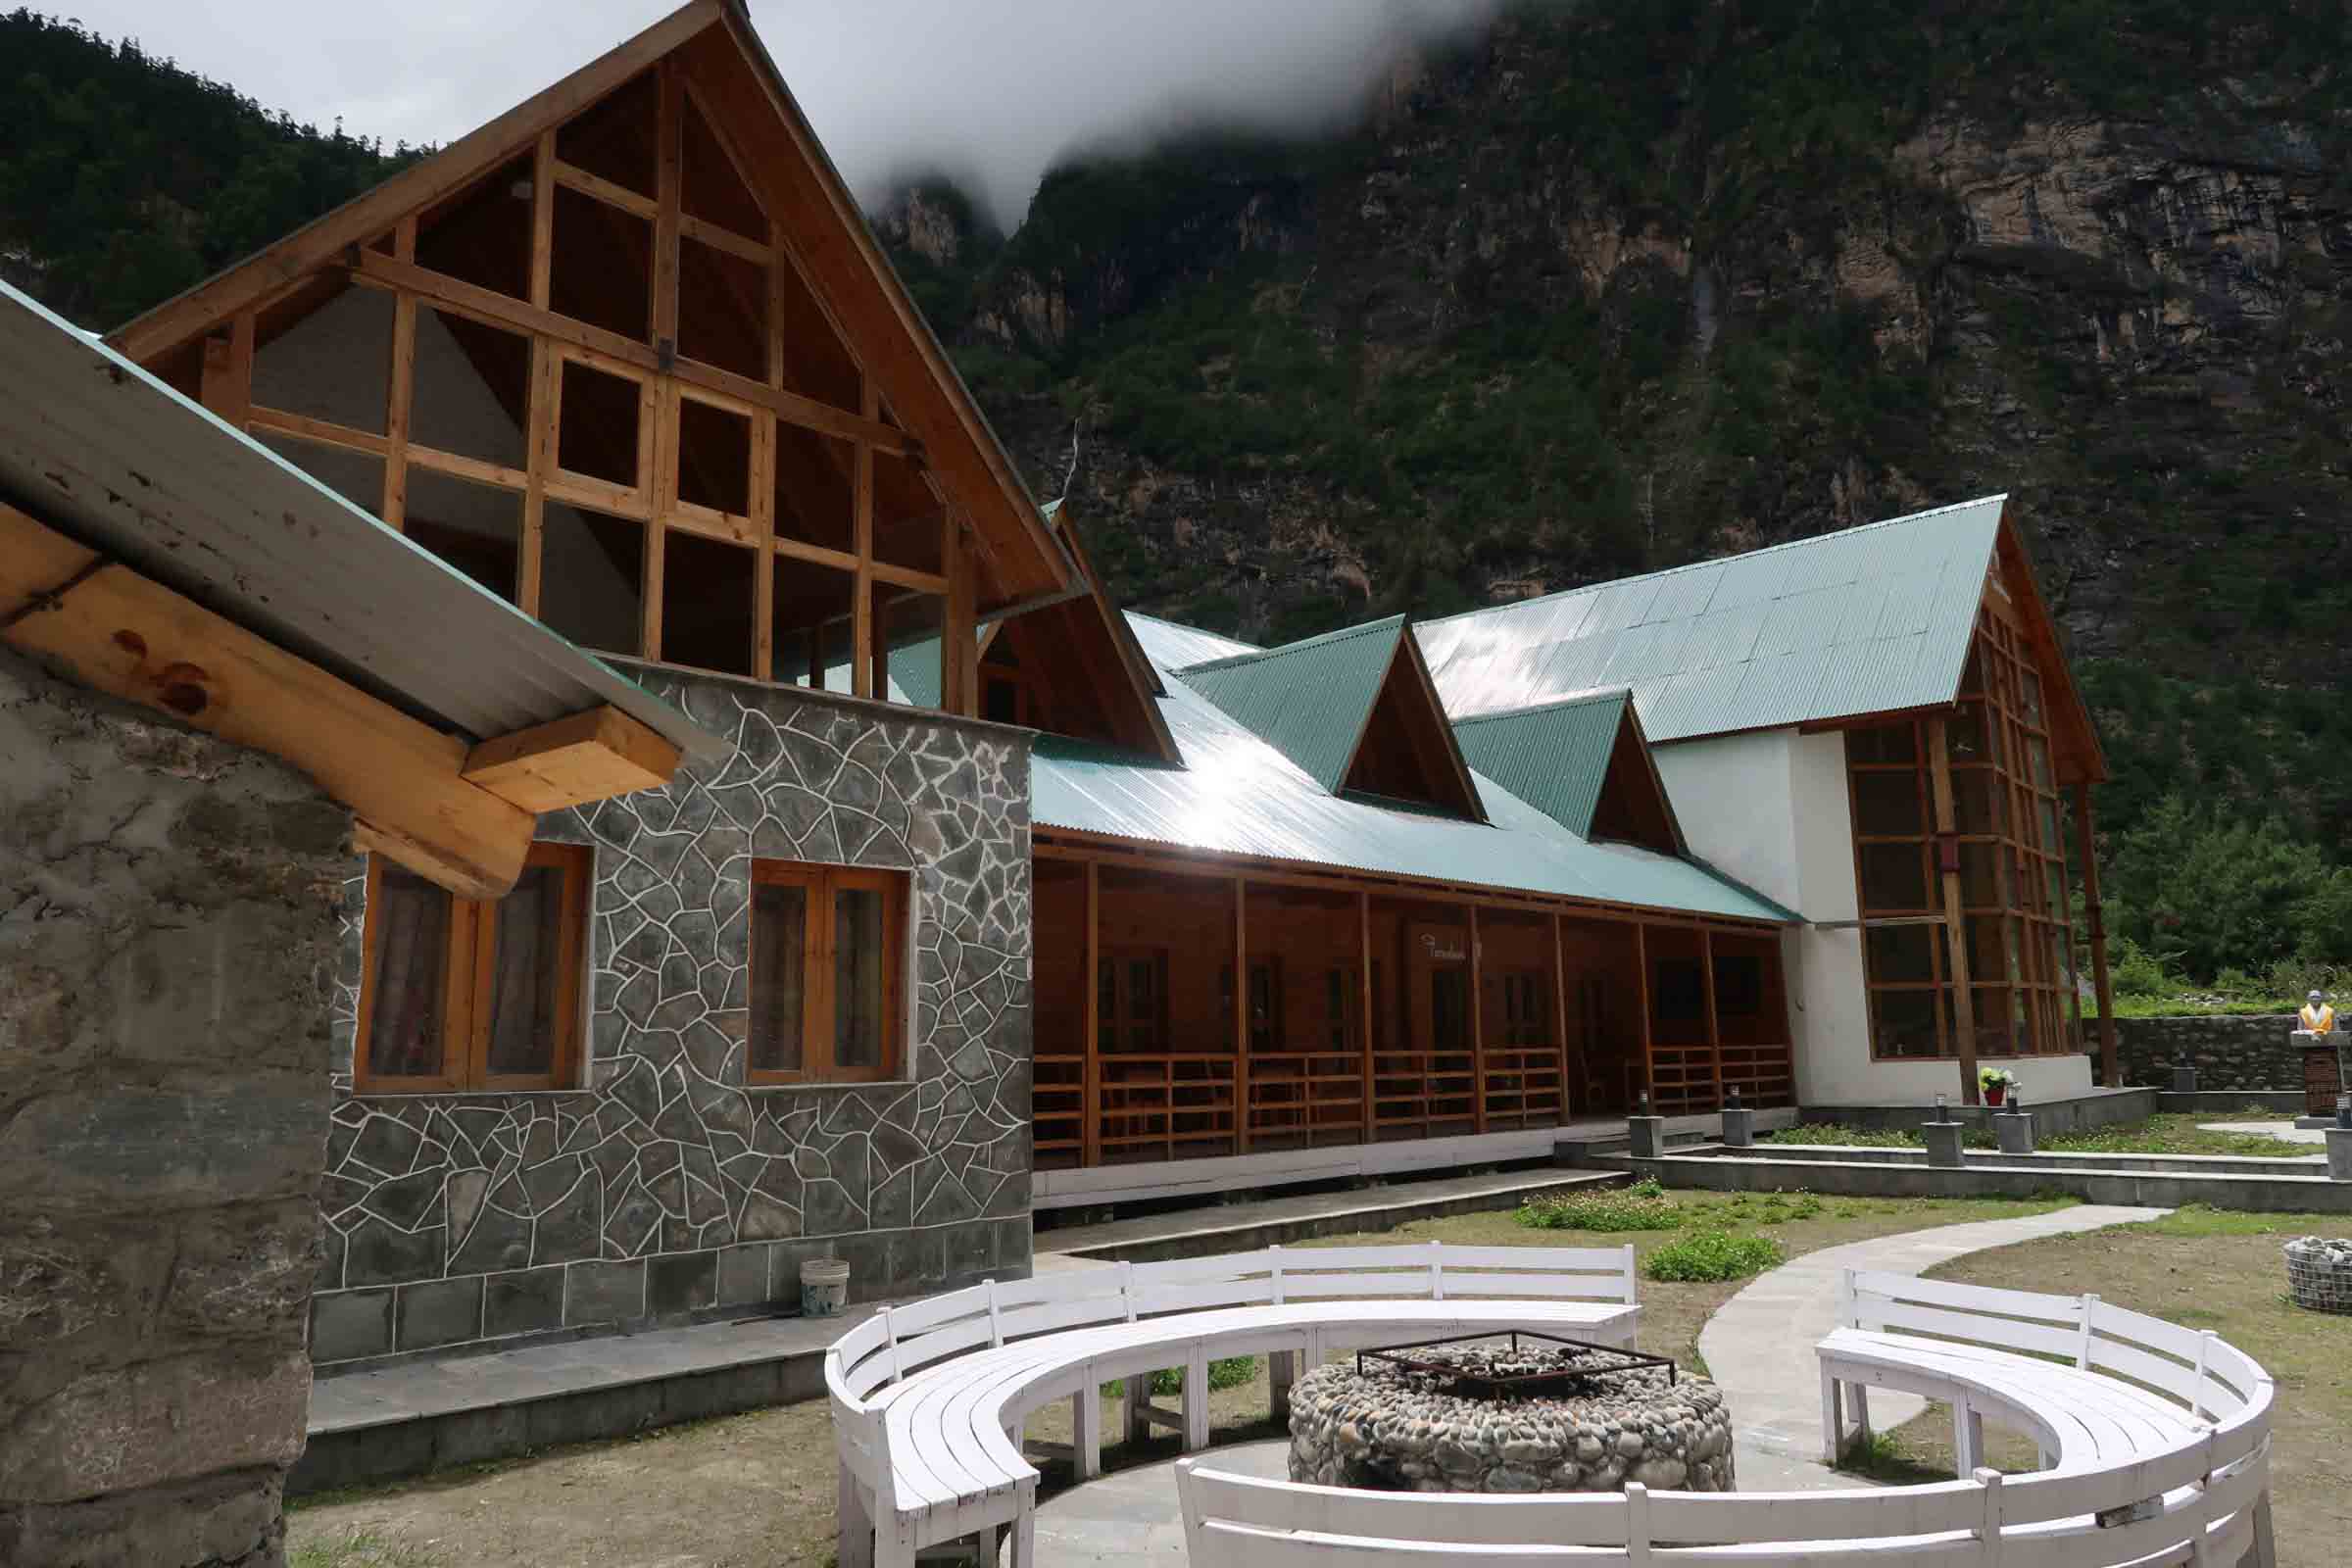 The farm house inside the premises of manang beverage in Manang valley